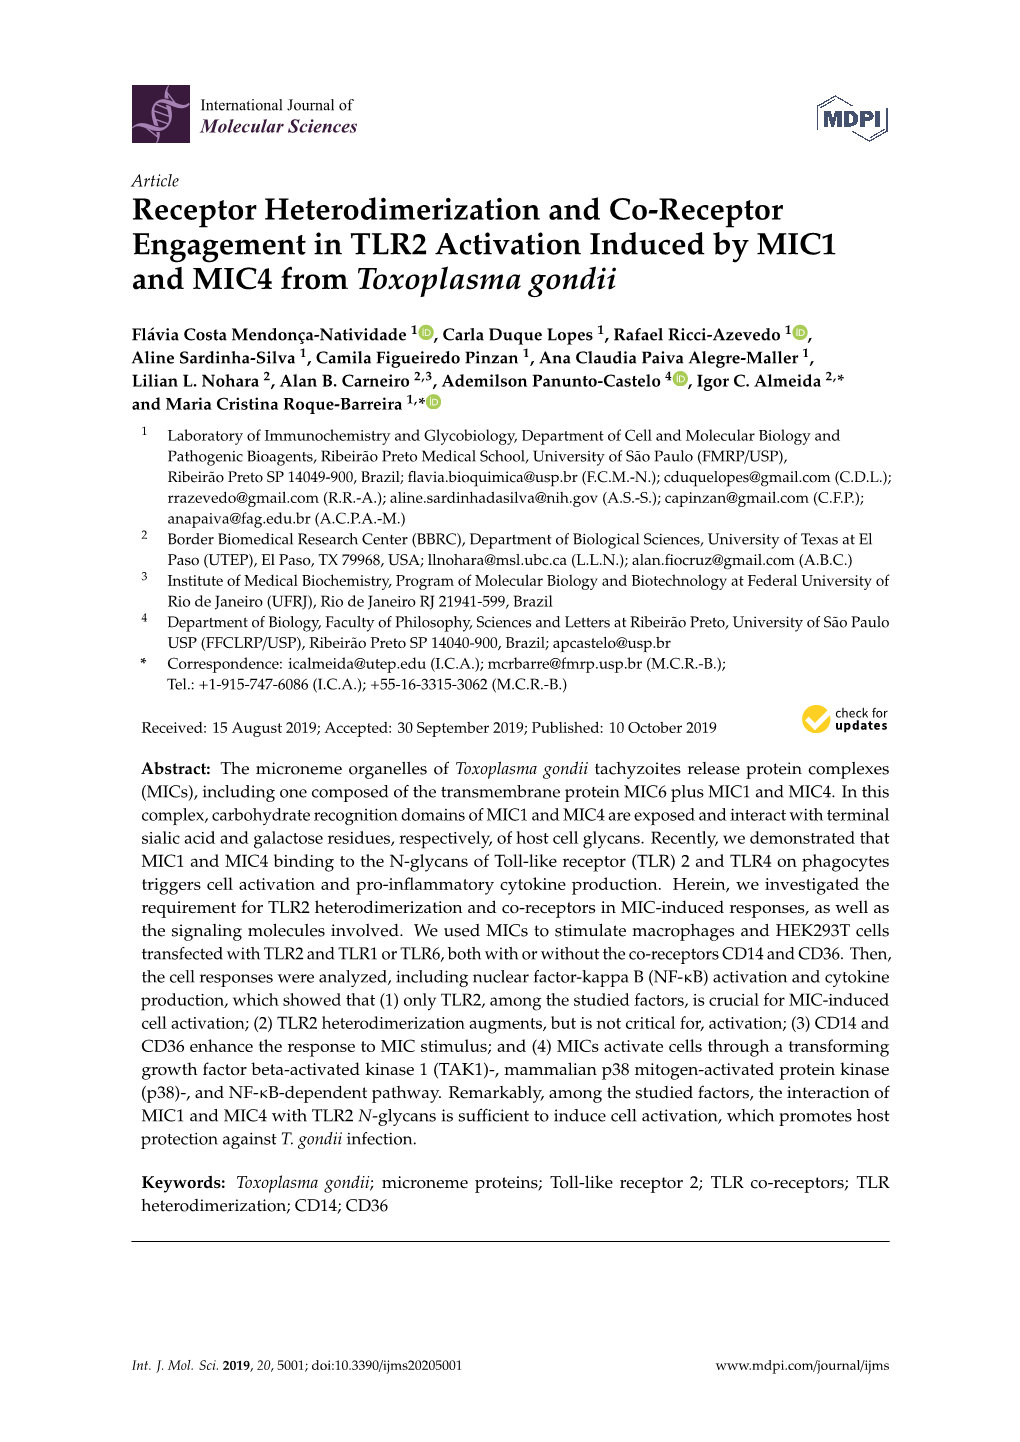 Receptor Heterodimerization and Co-Receptor Engagement in TLR2 Activation Induced by MIC1 and MIC4 from Toxoplasma Gondii